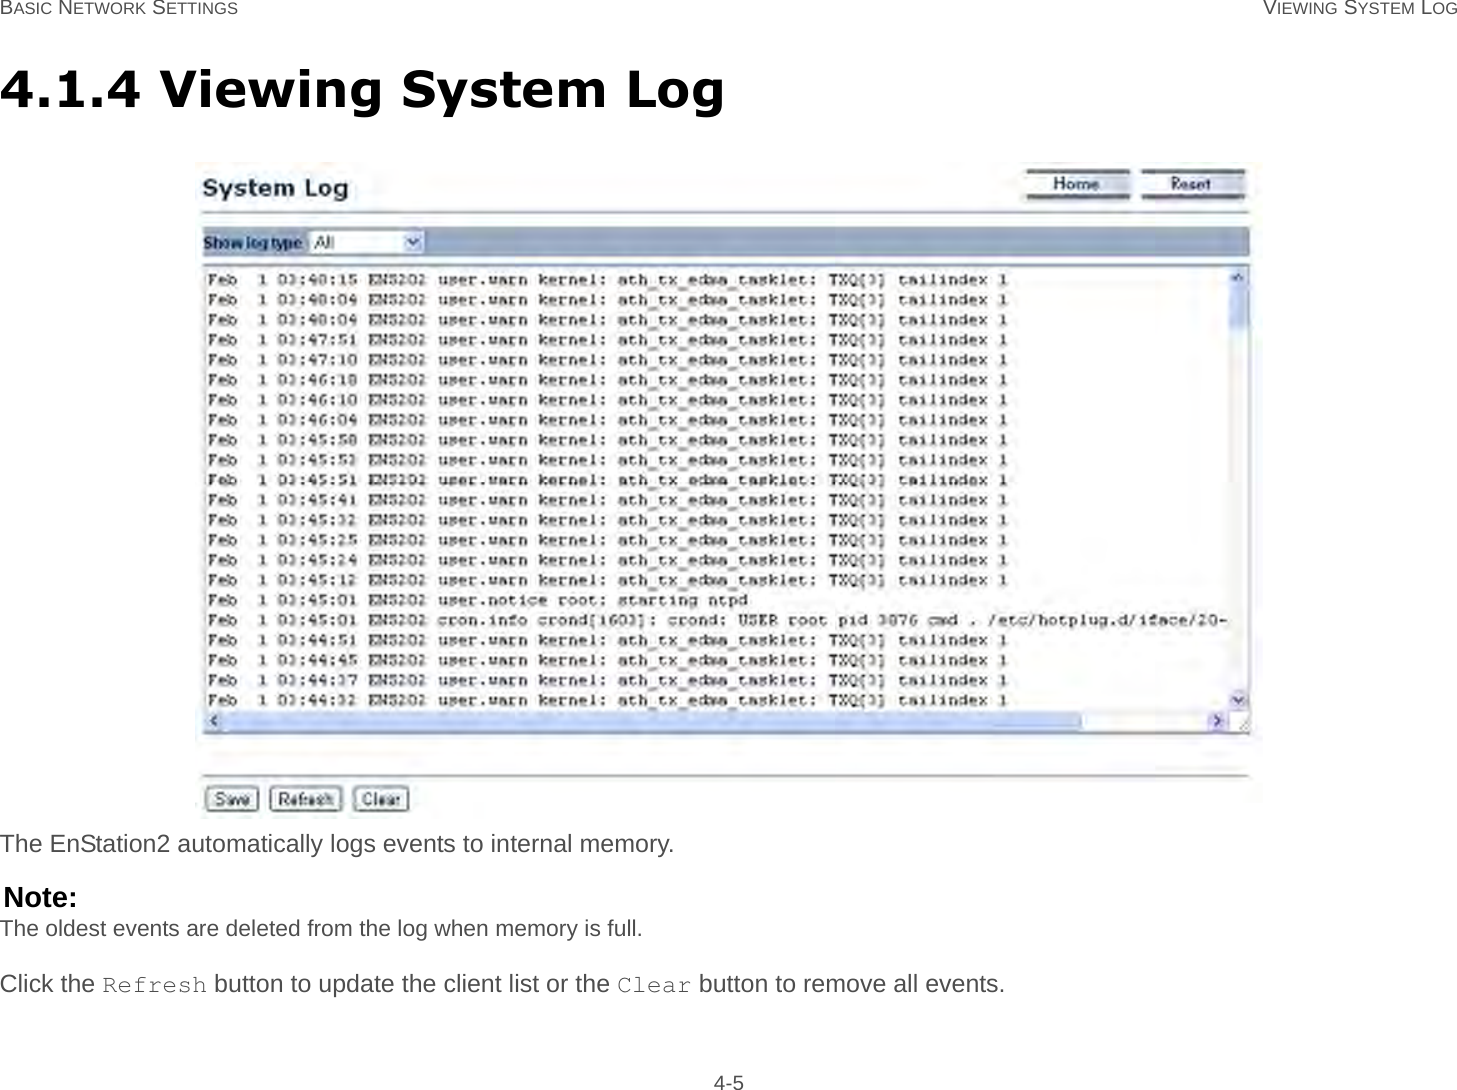 BASIC NETWORK SETTINGS VIEWING SYSTEM LOG 4-54.1.4 Viewing System LogThe EnStation2 automatically logs events to internal memory.Note:The oldest events are deleted from the log when memory is full.Click the Refresh button to update the client list or the Clear button to remove all events.